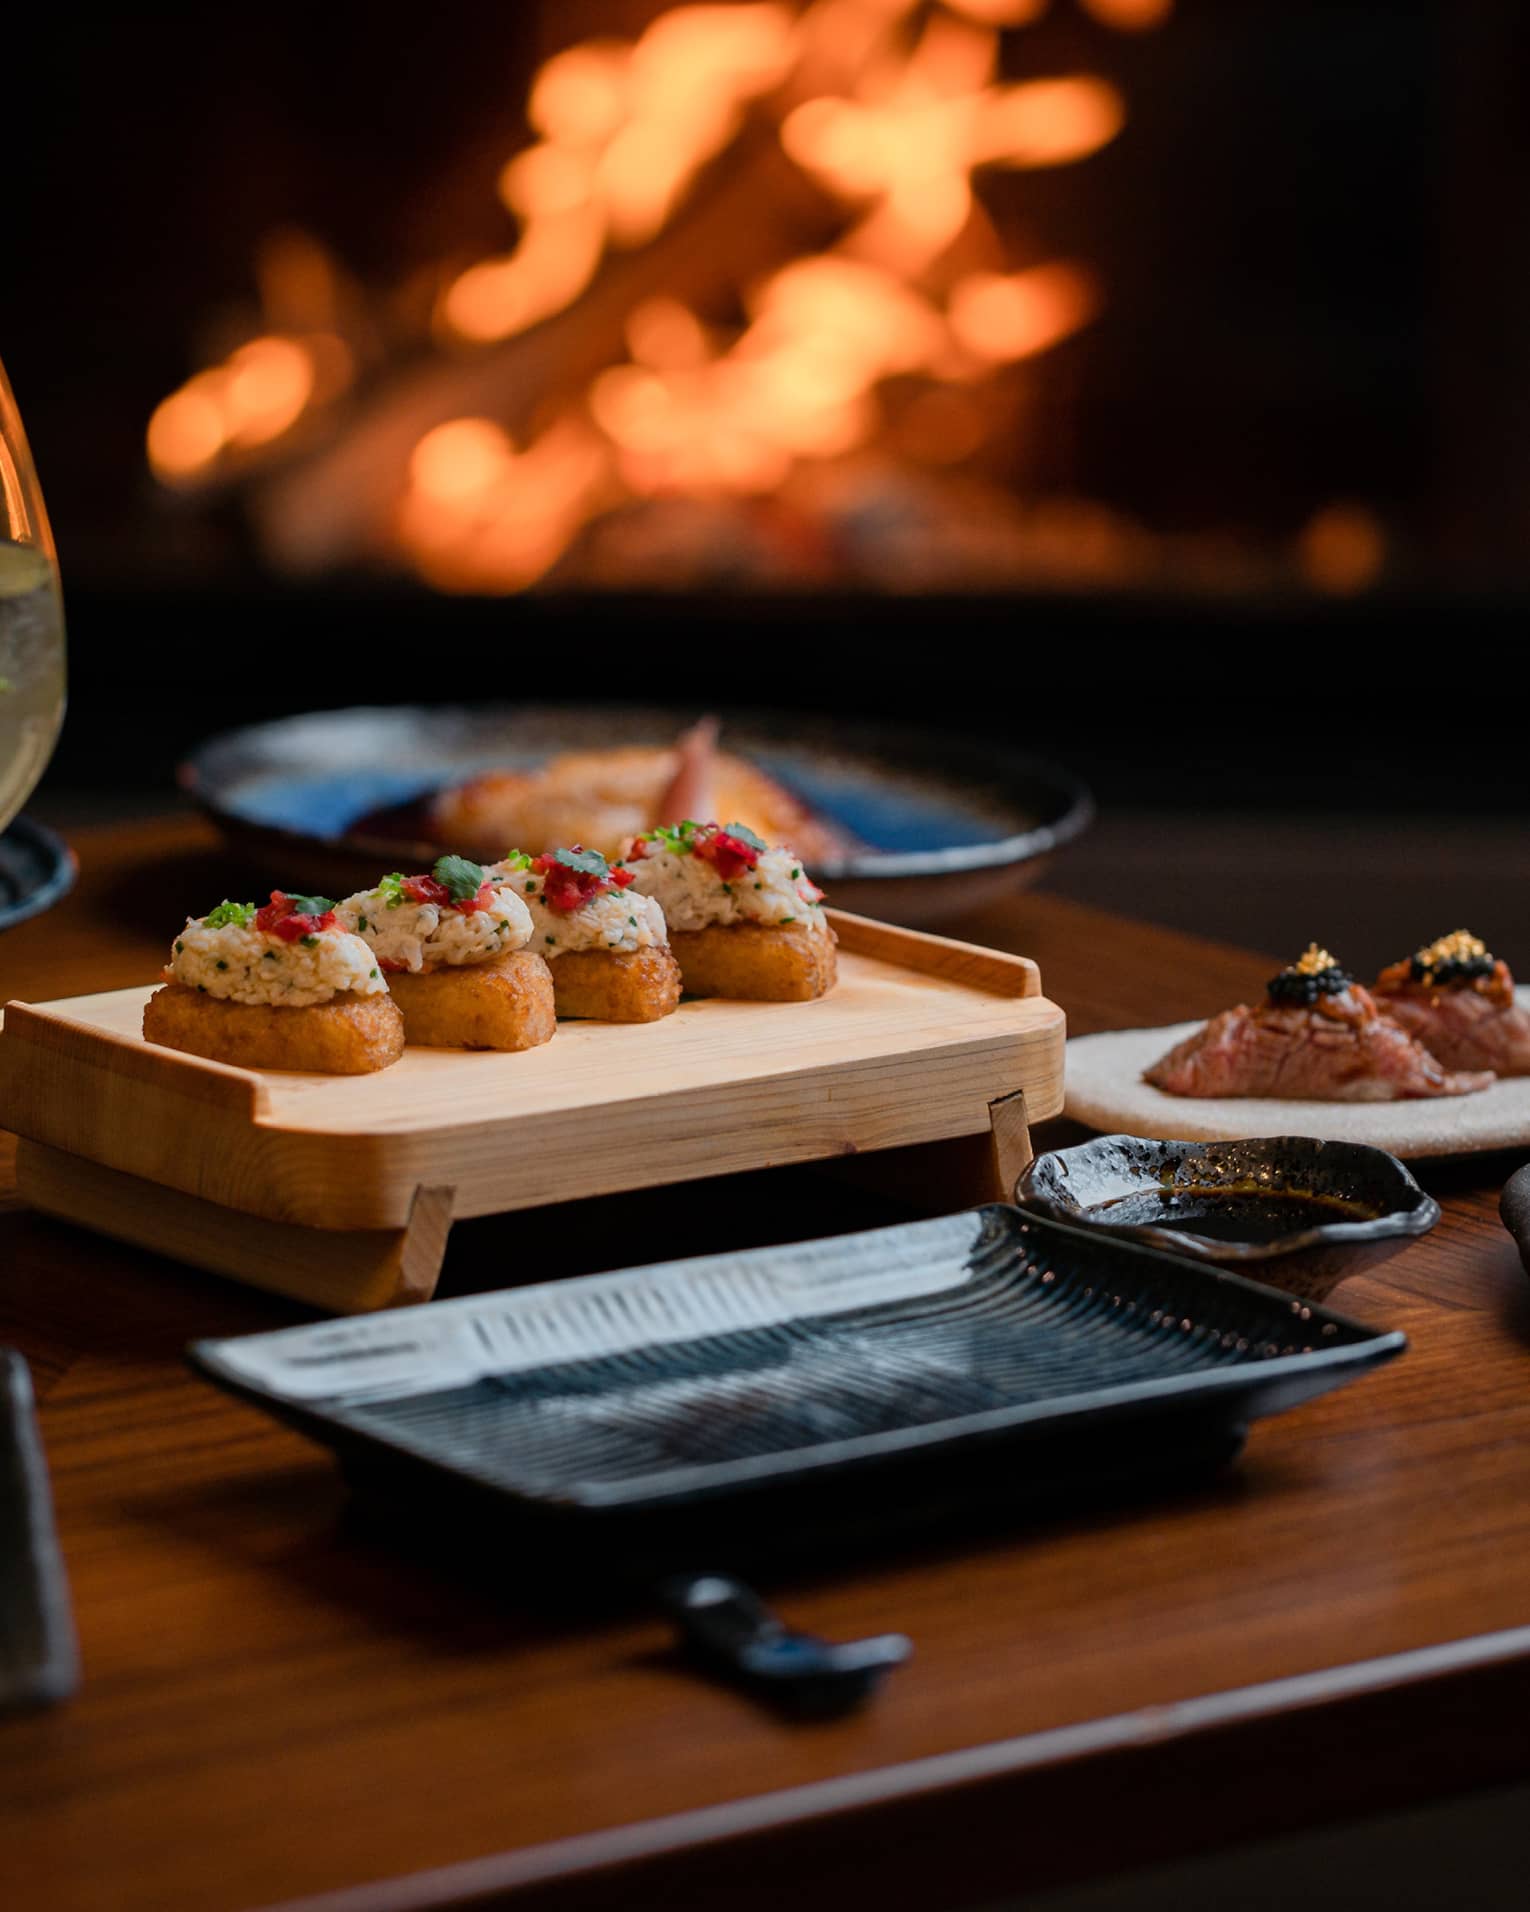 Sushi dinner setup on table with glass of white wine and sparkling fire in backdrop